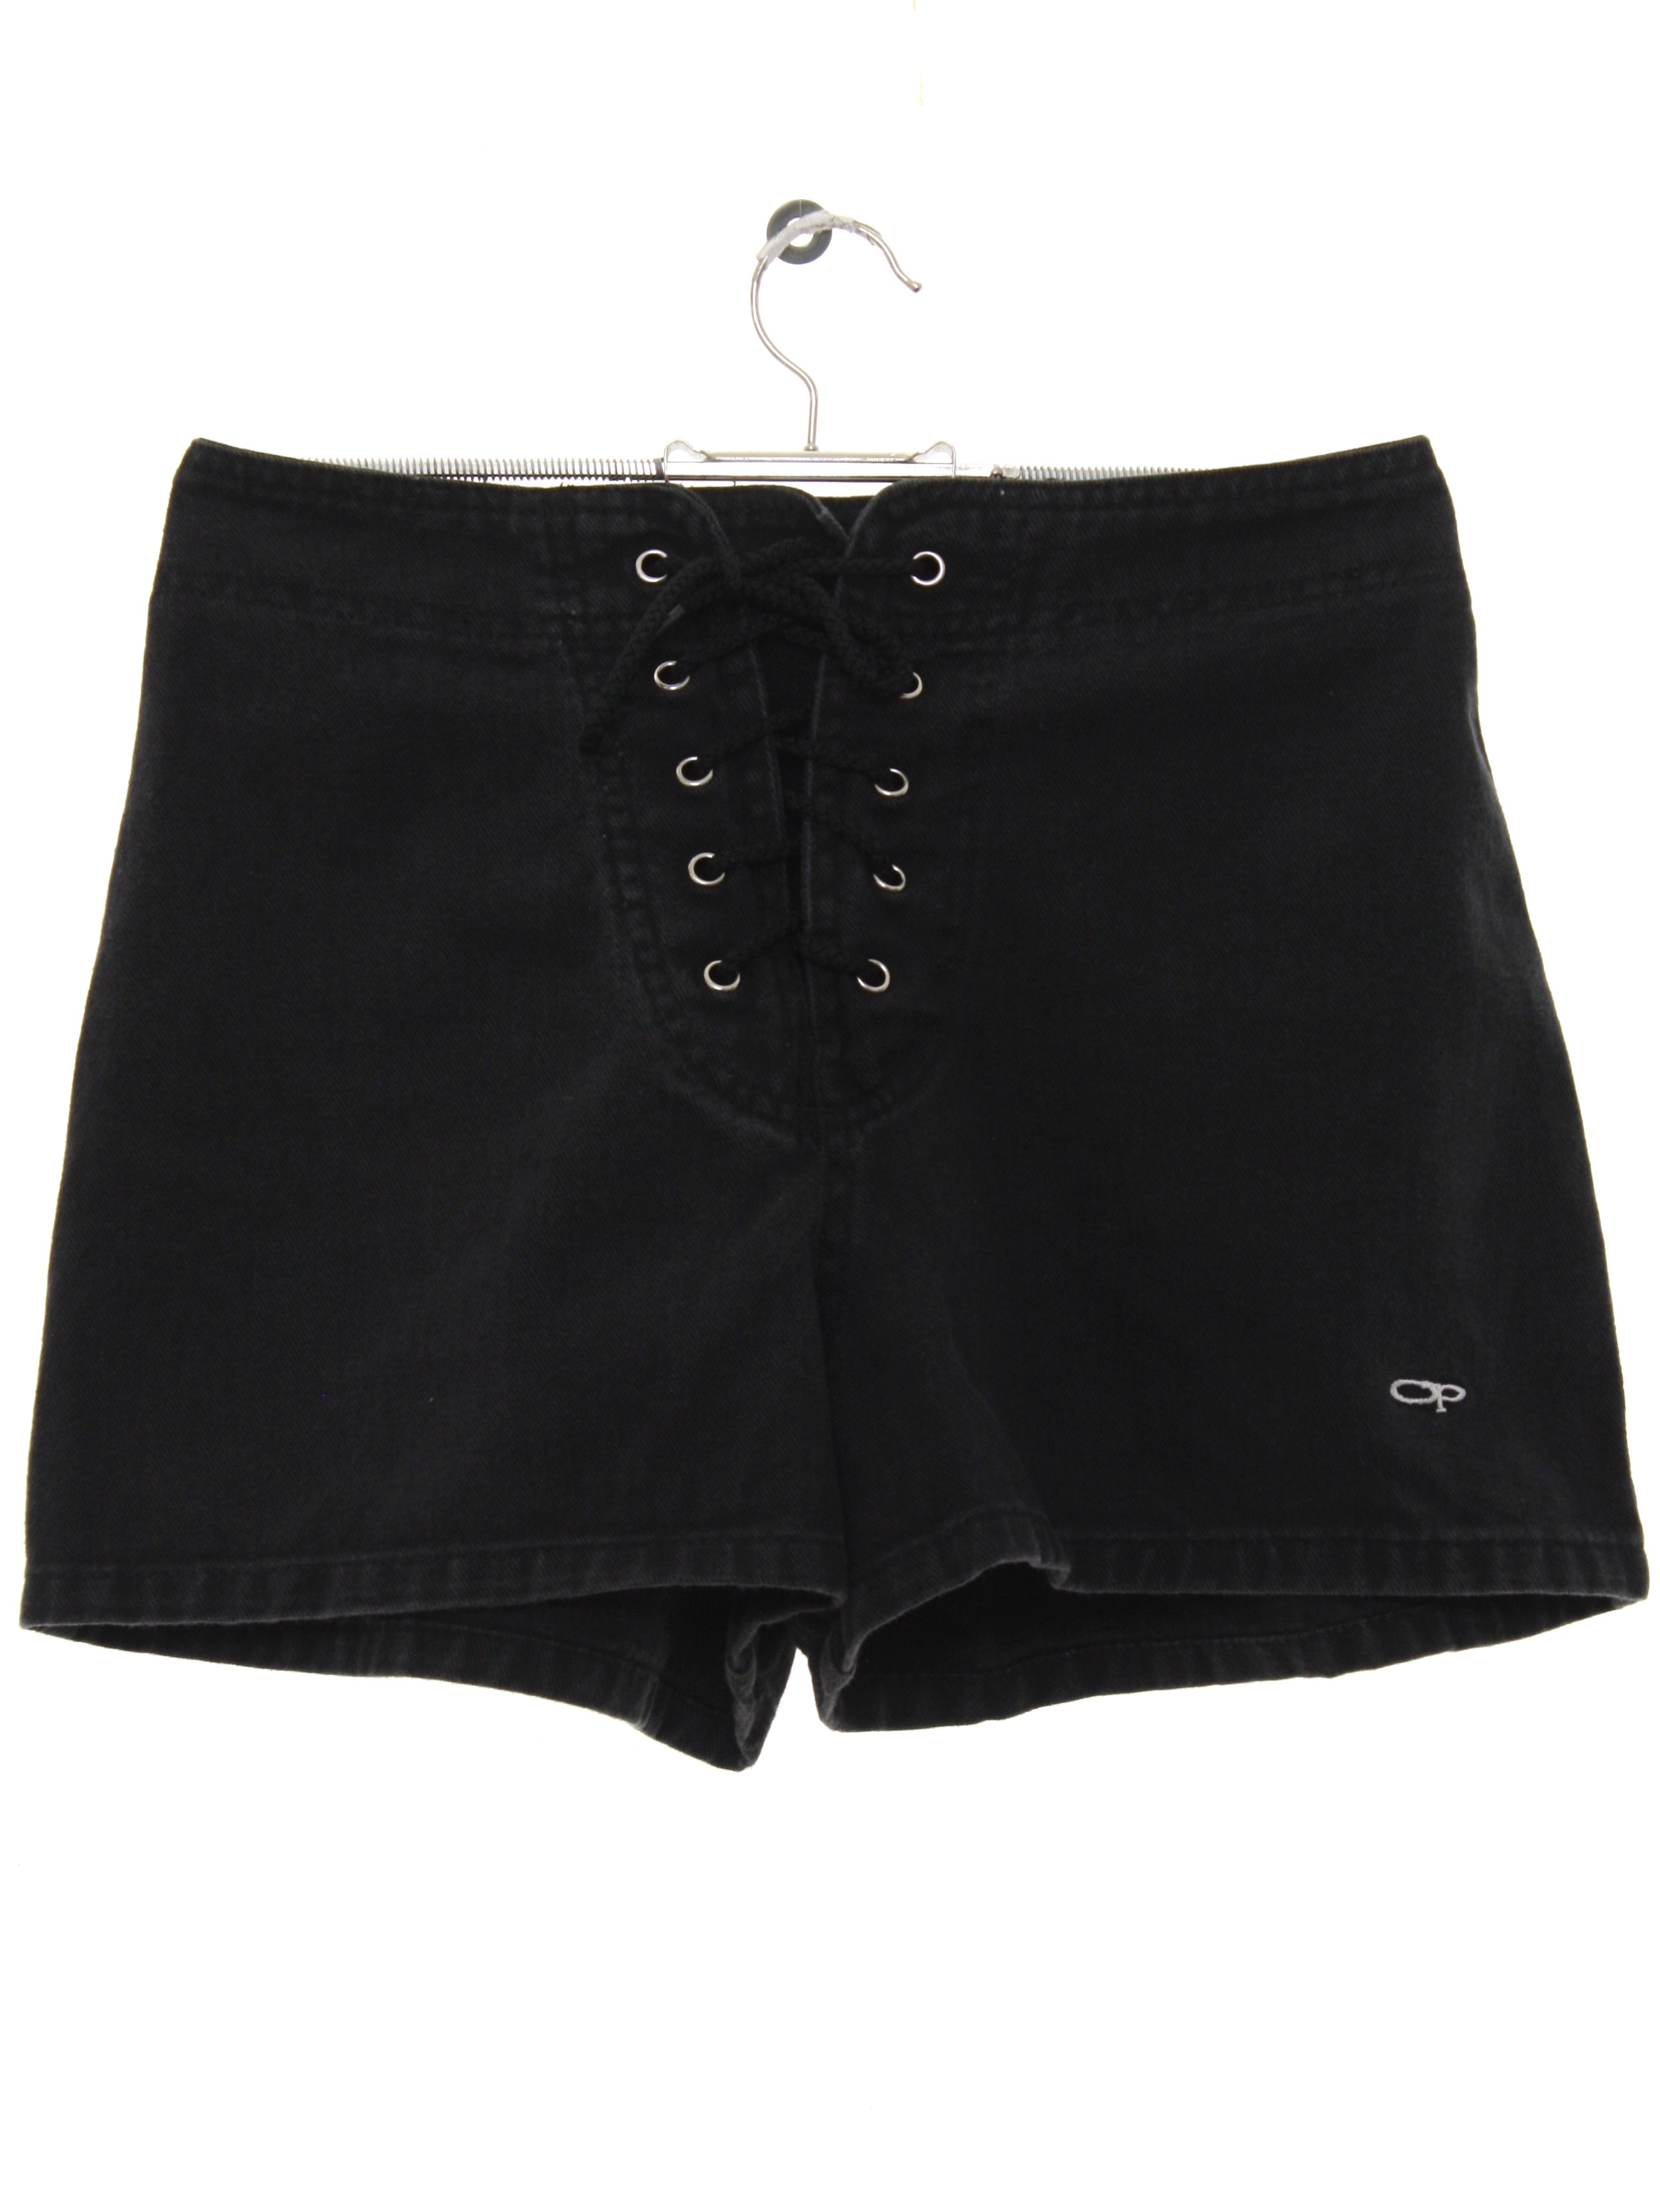 Retro 1980's Shorts (OP) : Late 80s or Early 90s -OP- Womens black ...